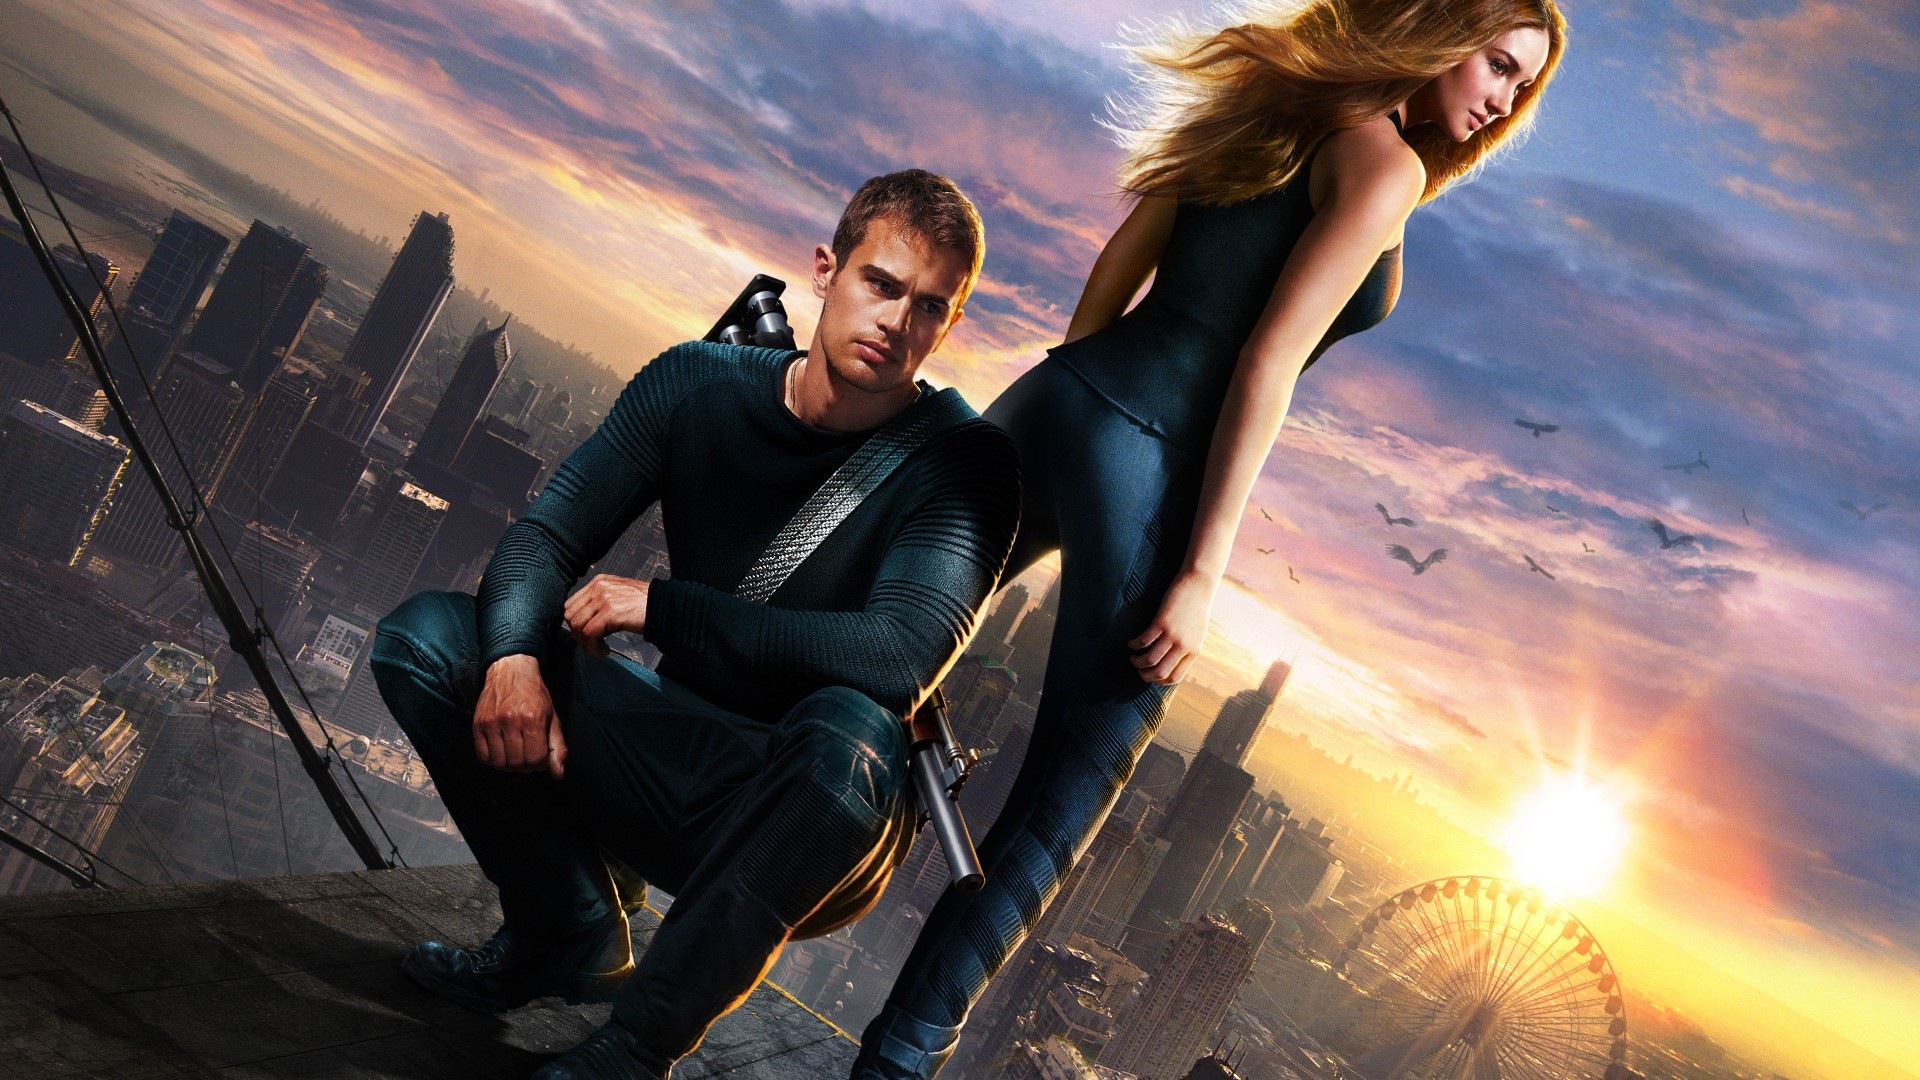 Divergent movie HD wallpapers #10 - 1920x1080